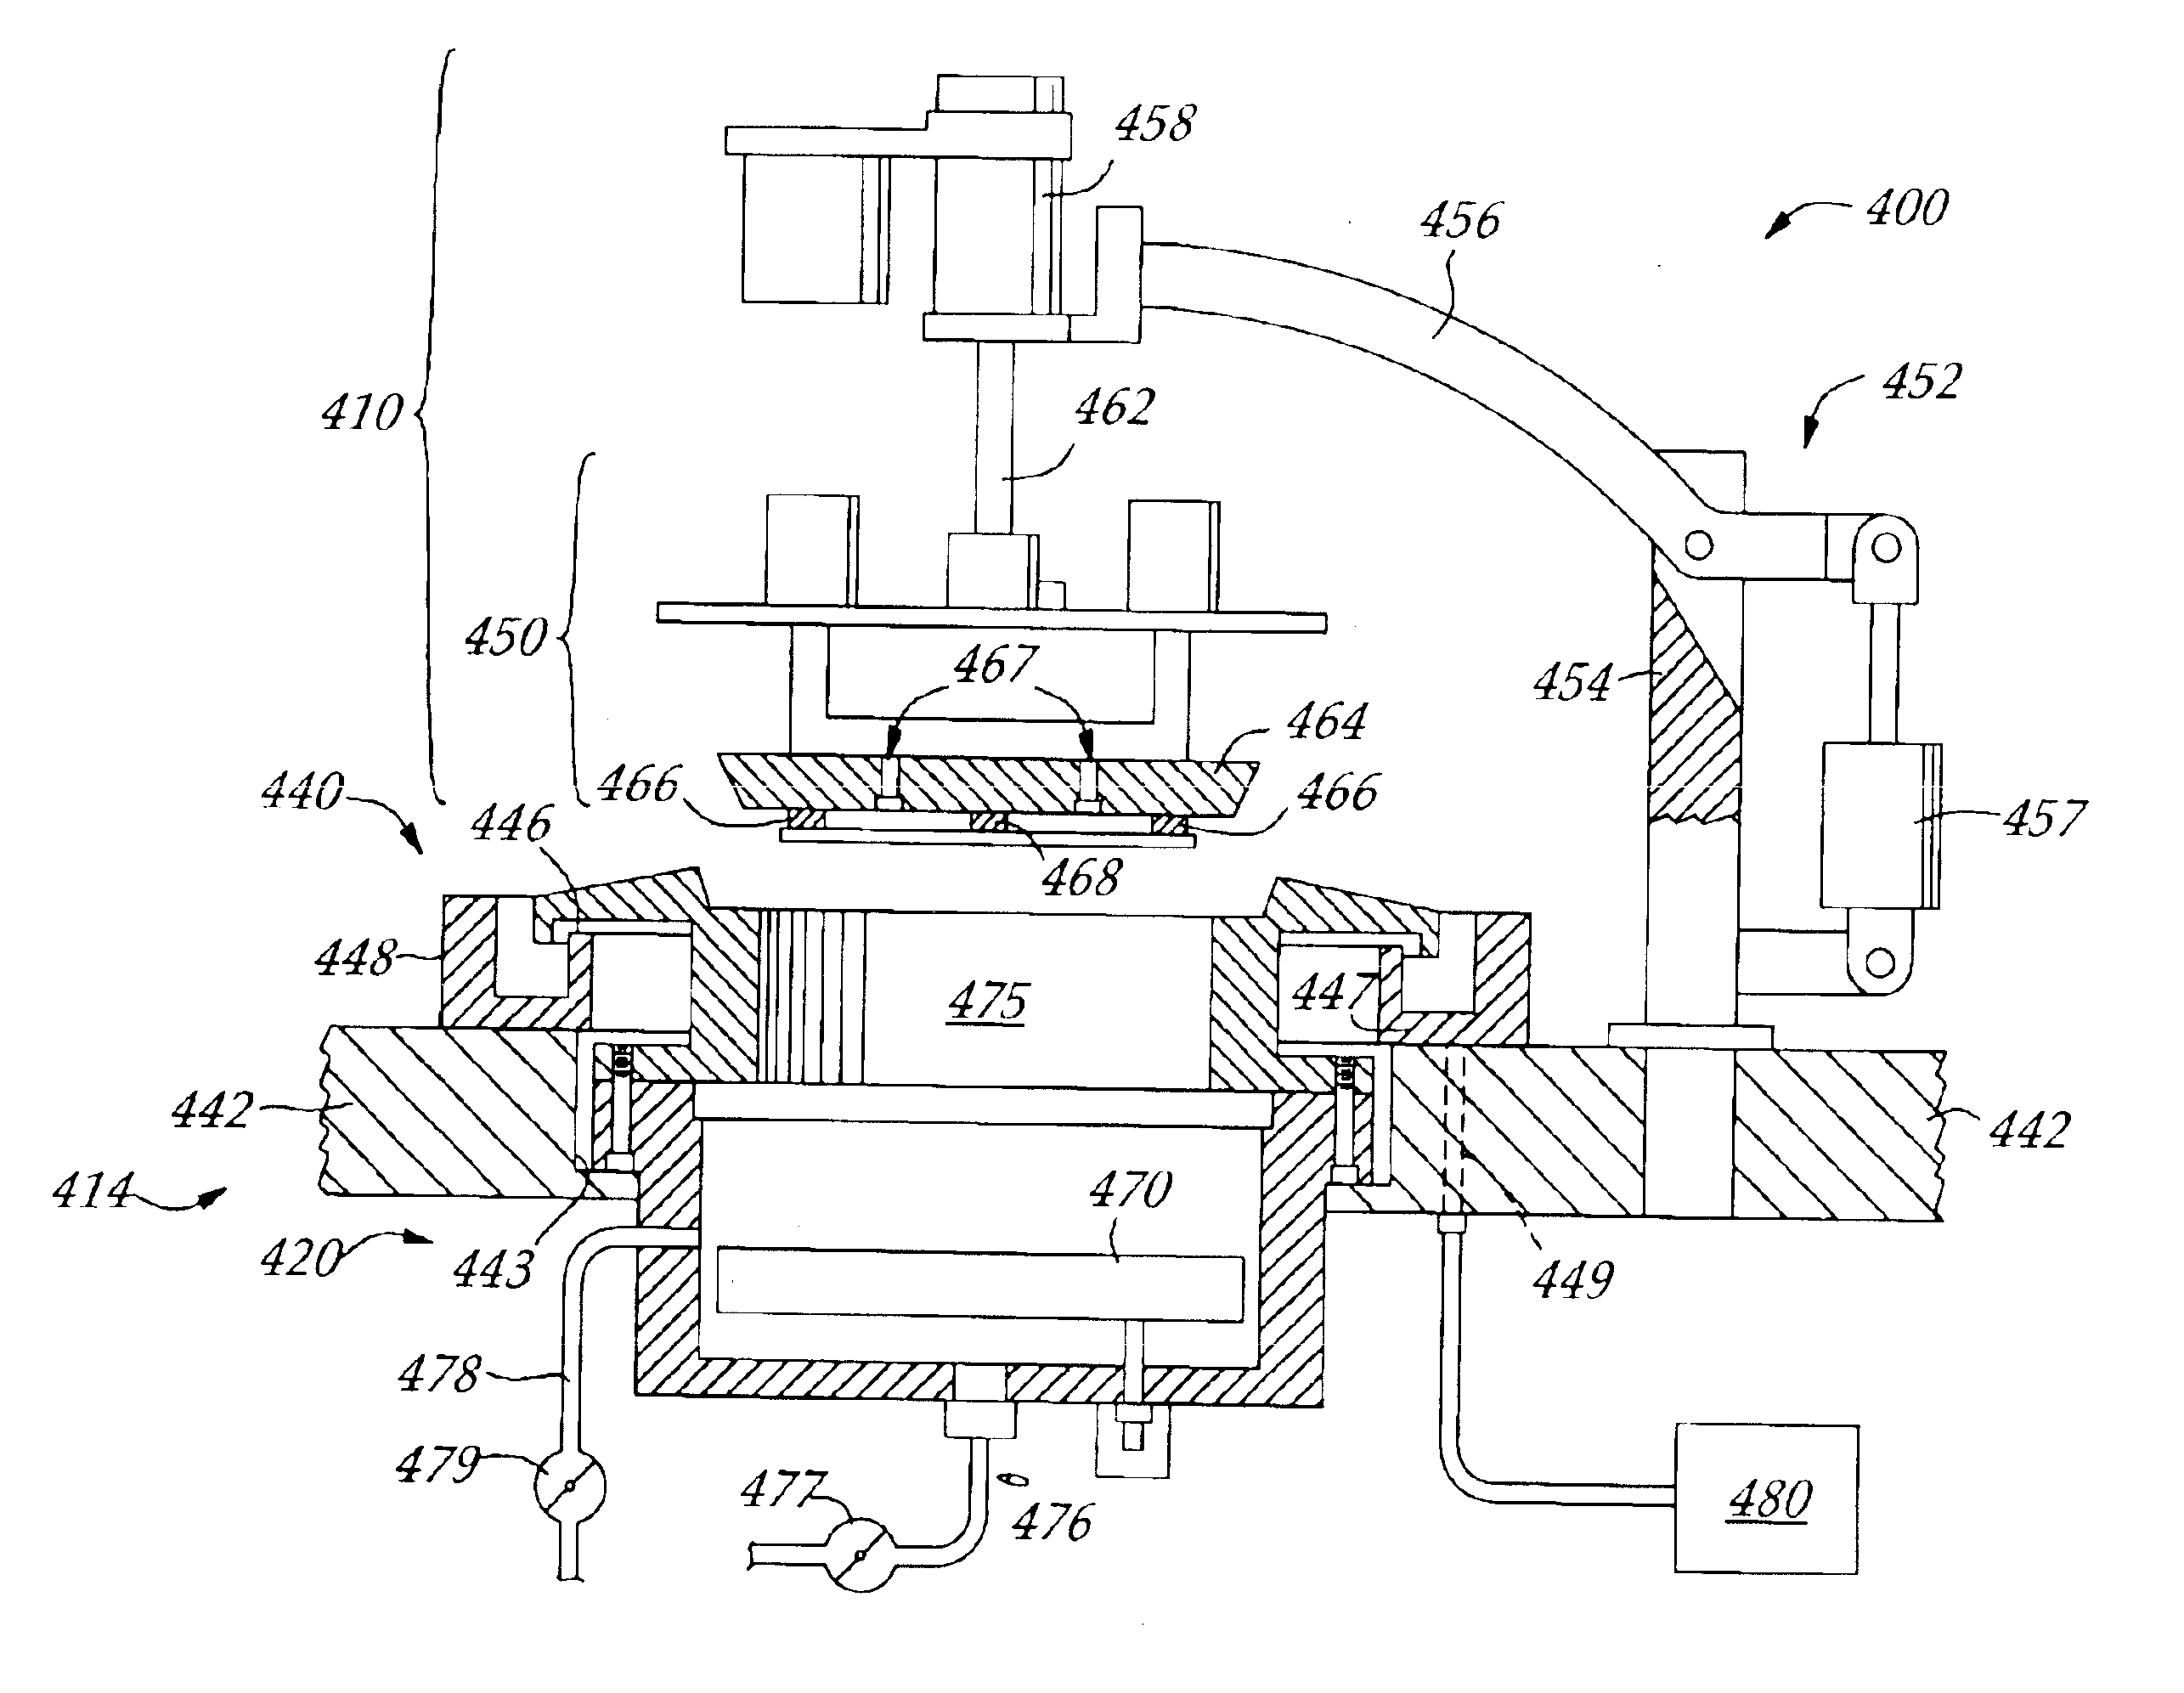 Method and apparatus for reducing organic depletion during non-processing time periods